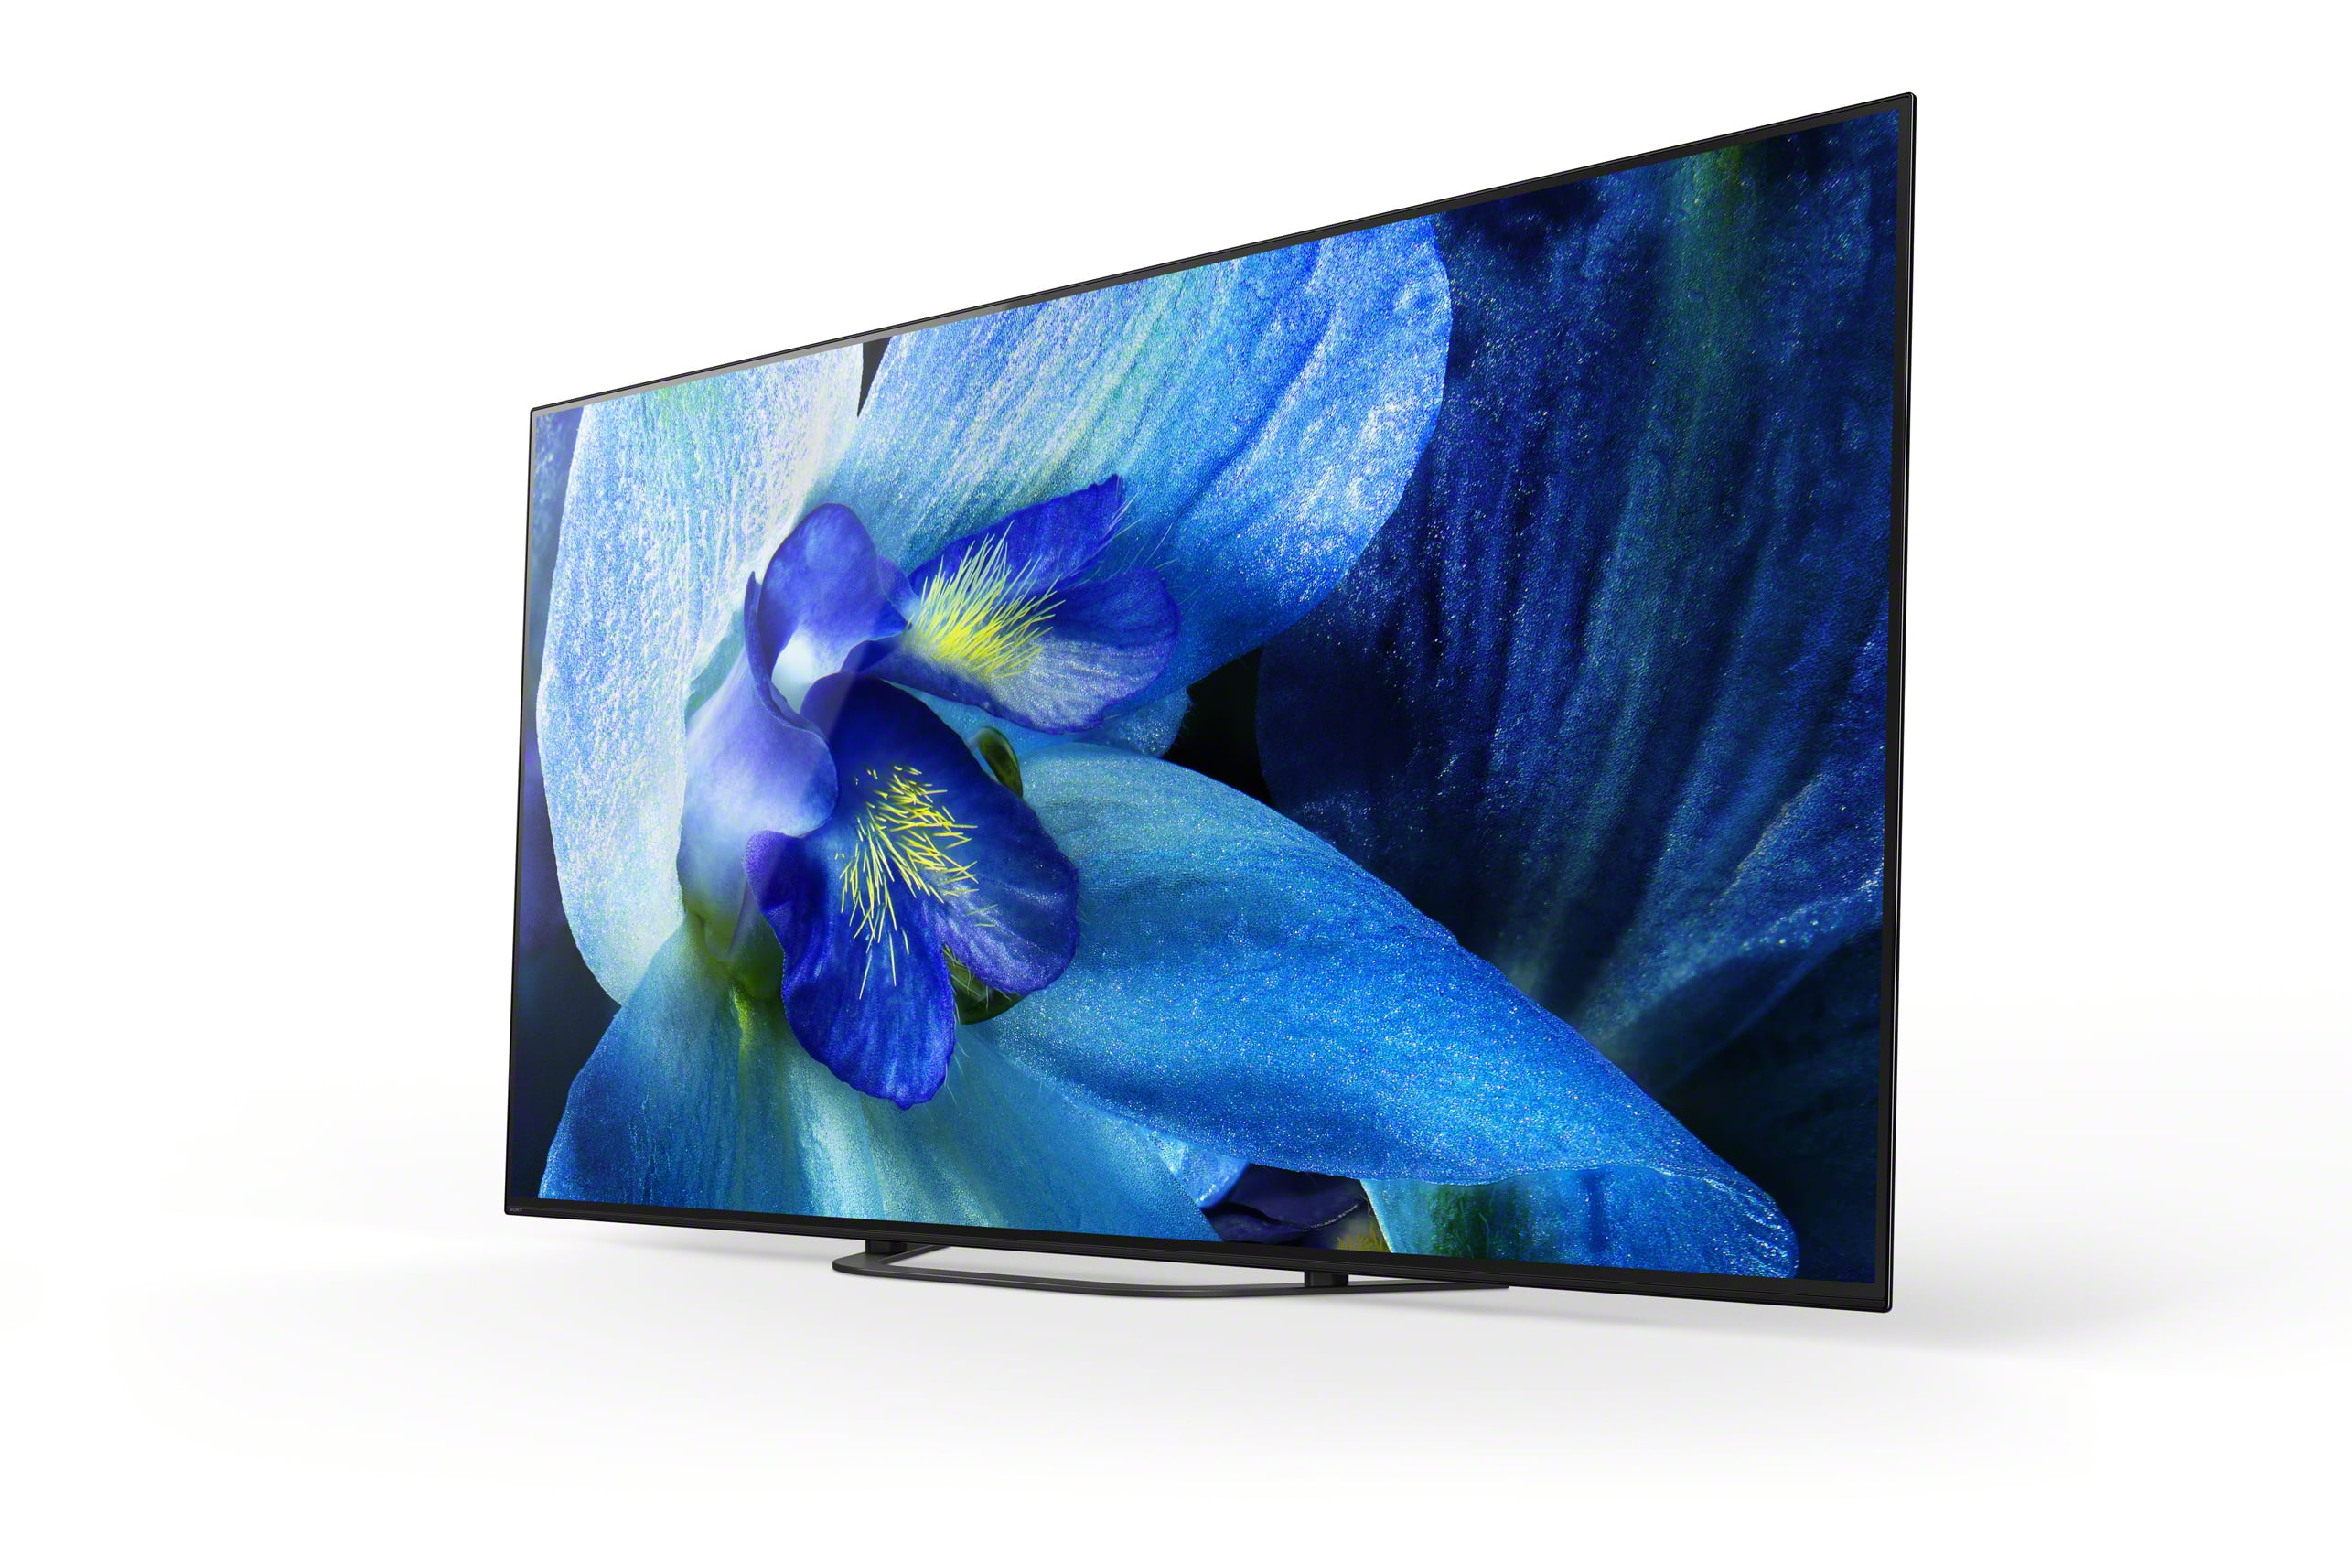 Undtagelse tone Hej Sony 65" Class 4K UHD OLED Android Smart TV HDR BRAVIA A8G Series XBR65A8G  - Walmart.com